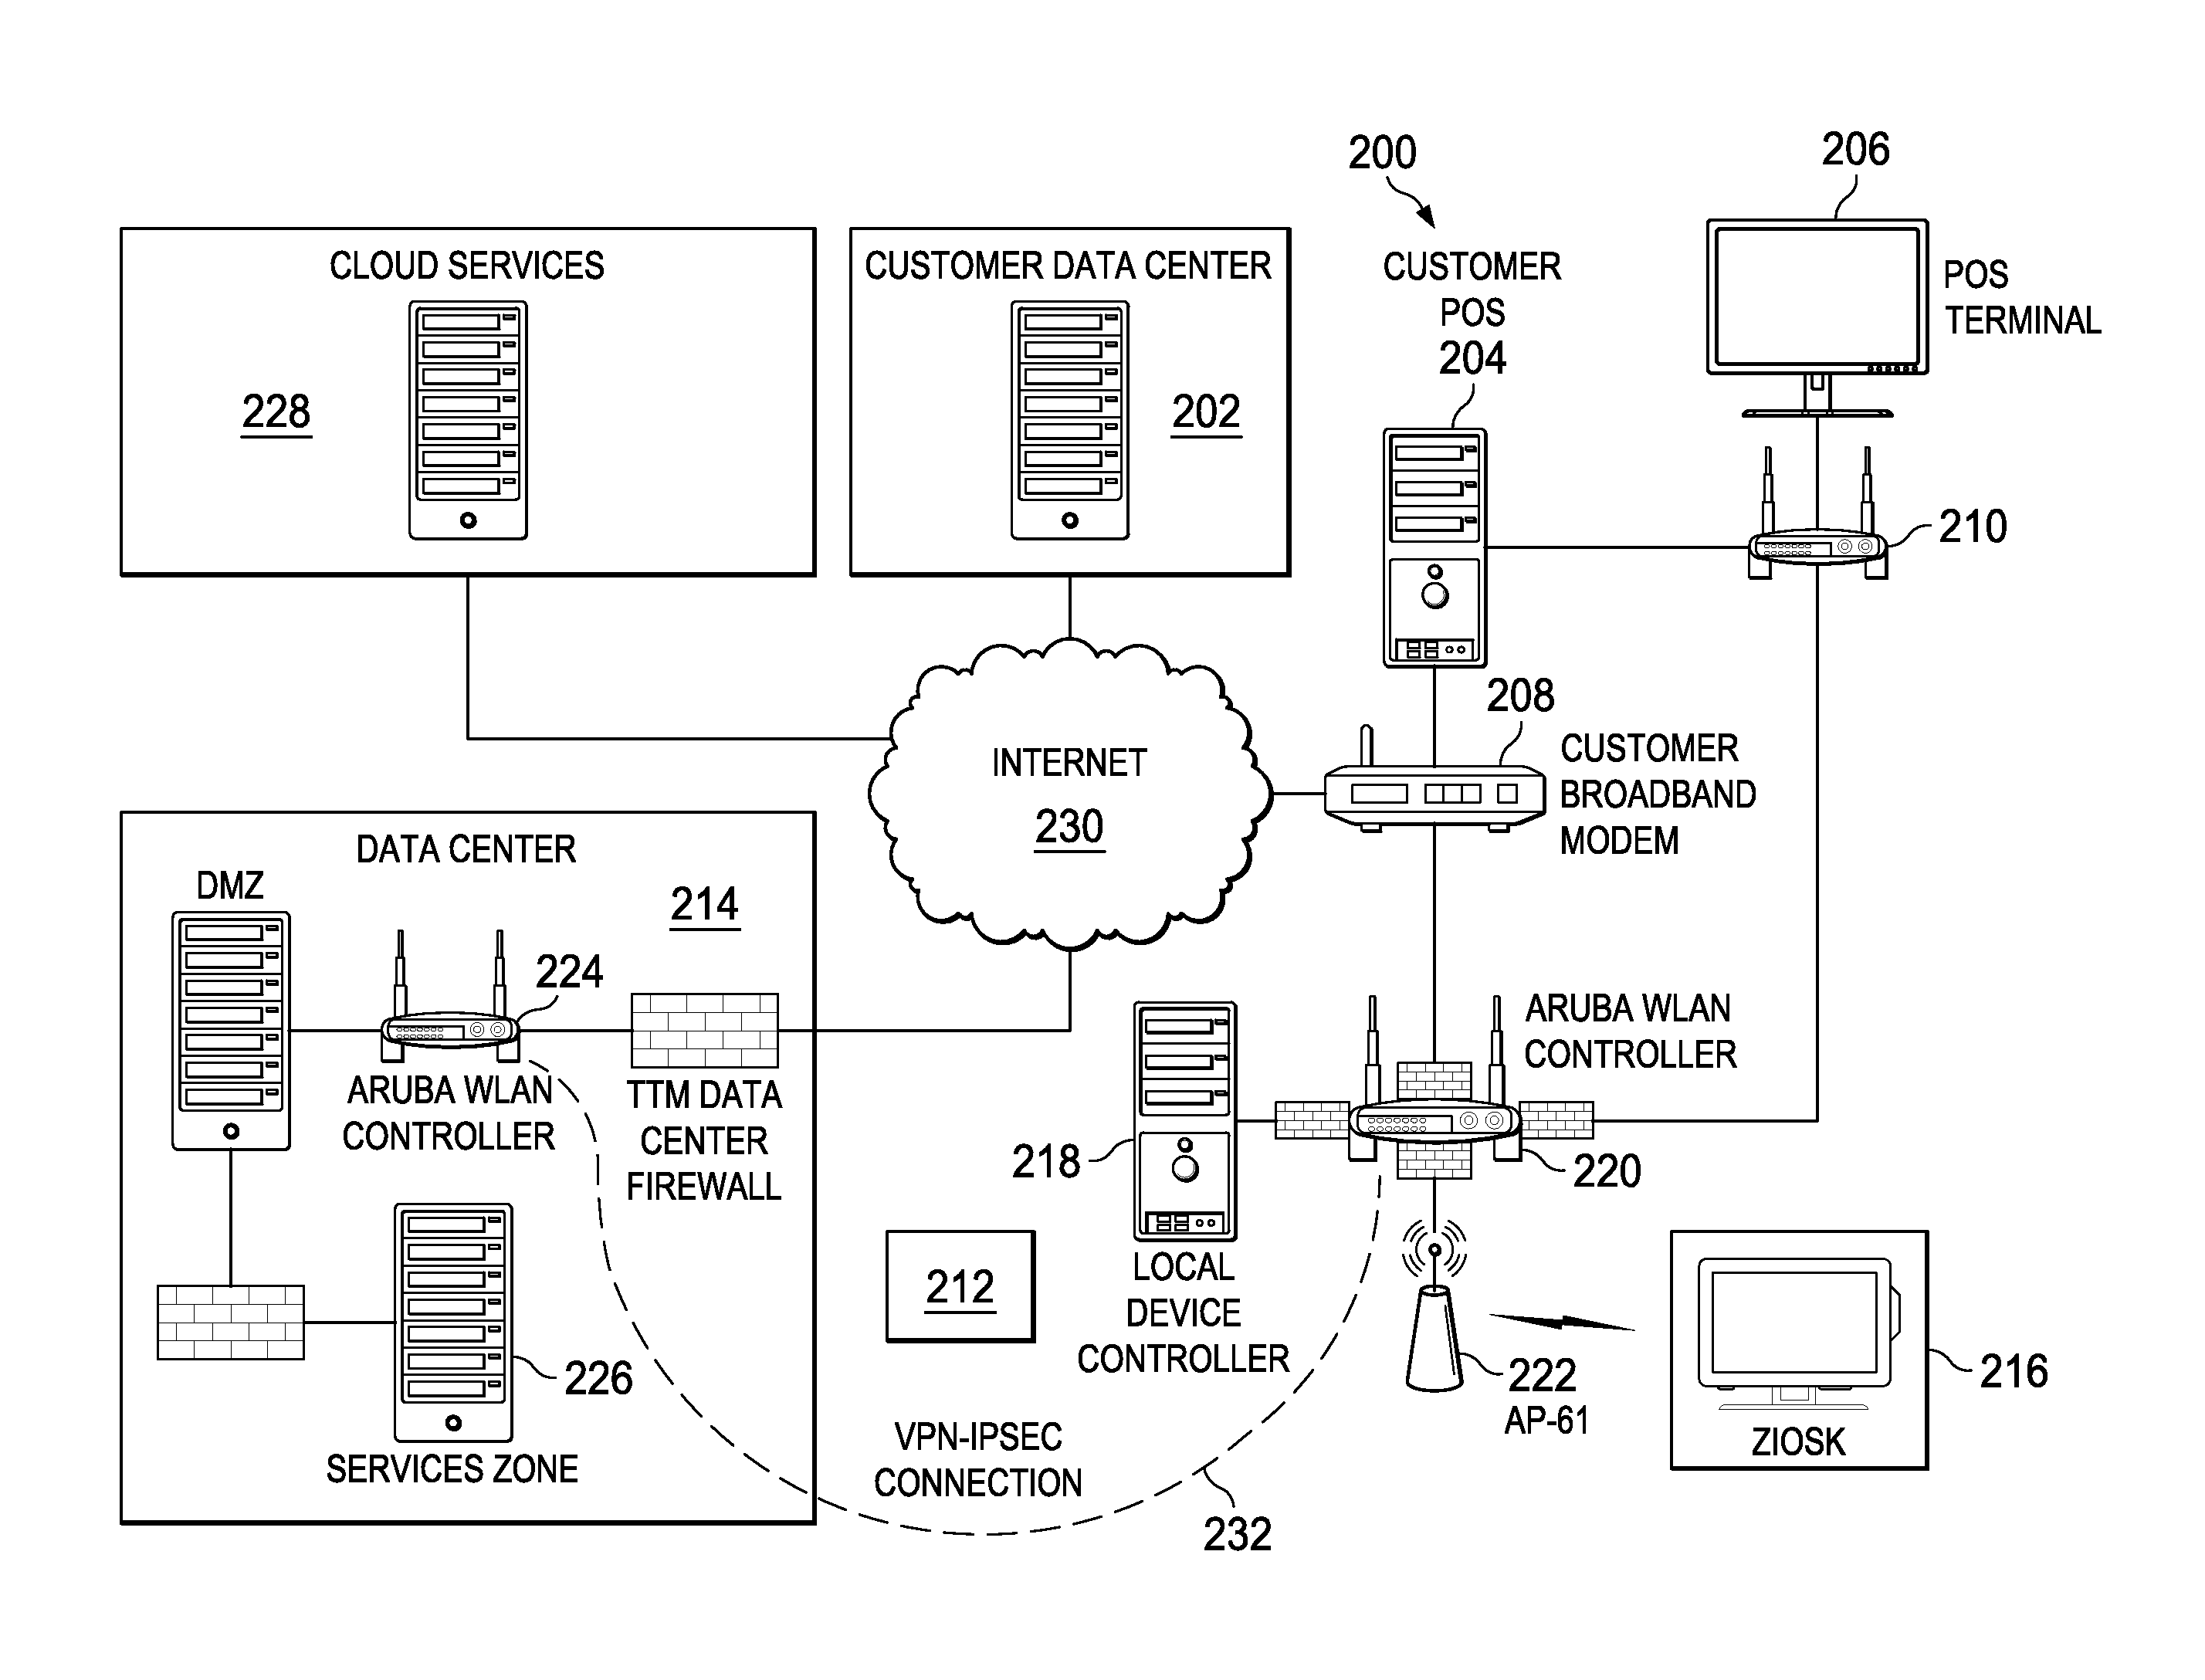 Table-side device integration to a point-of-sale (POS) hospitality system